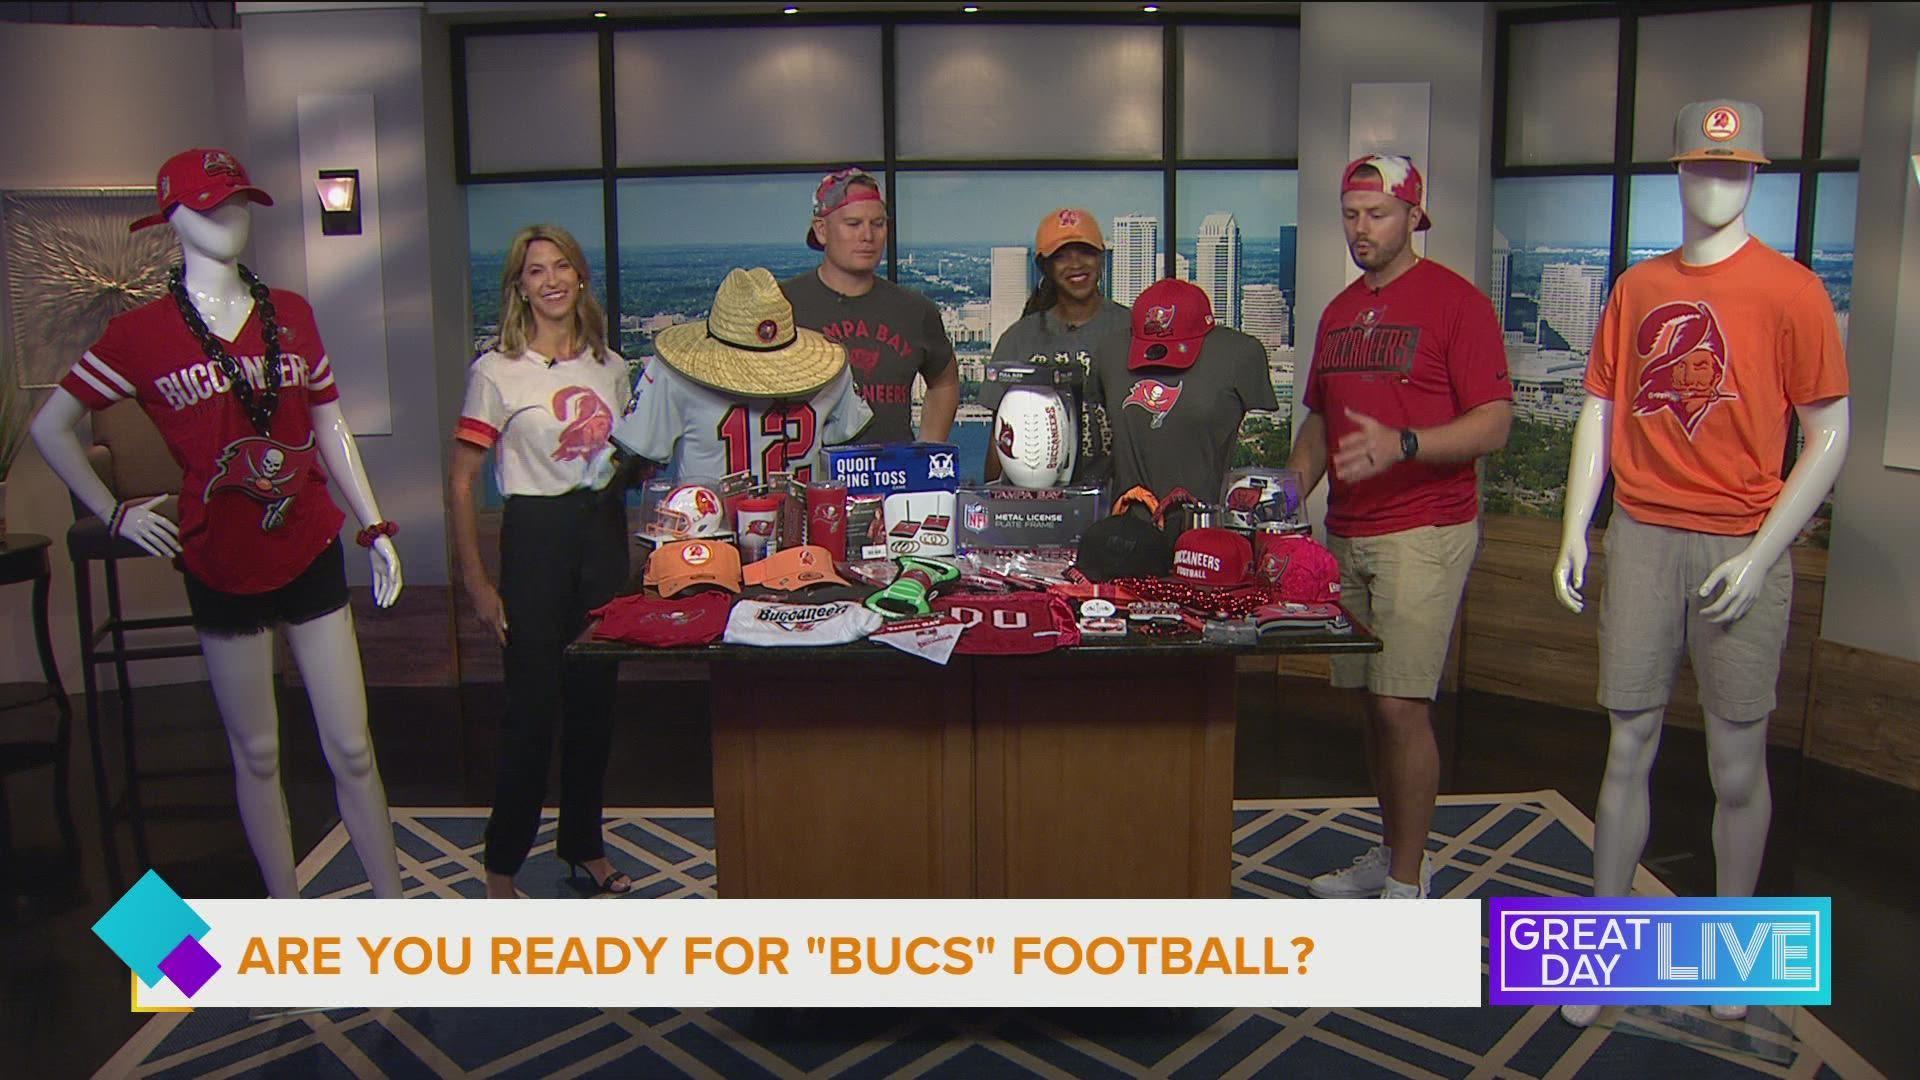 Get your new Bucs gear at Heads and Tails